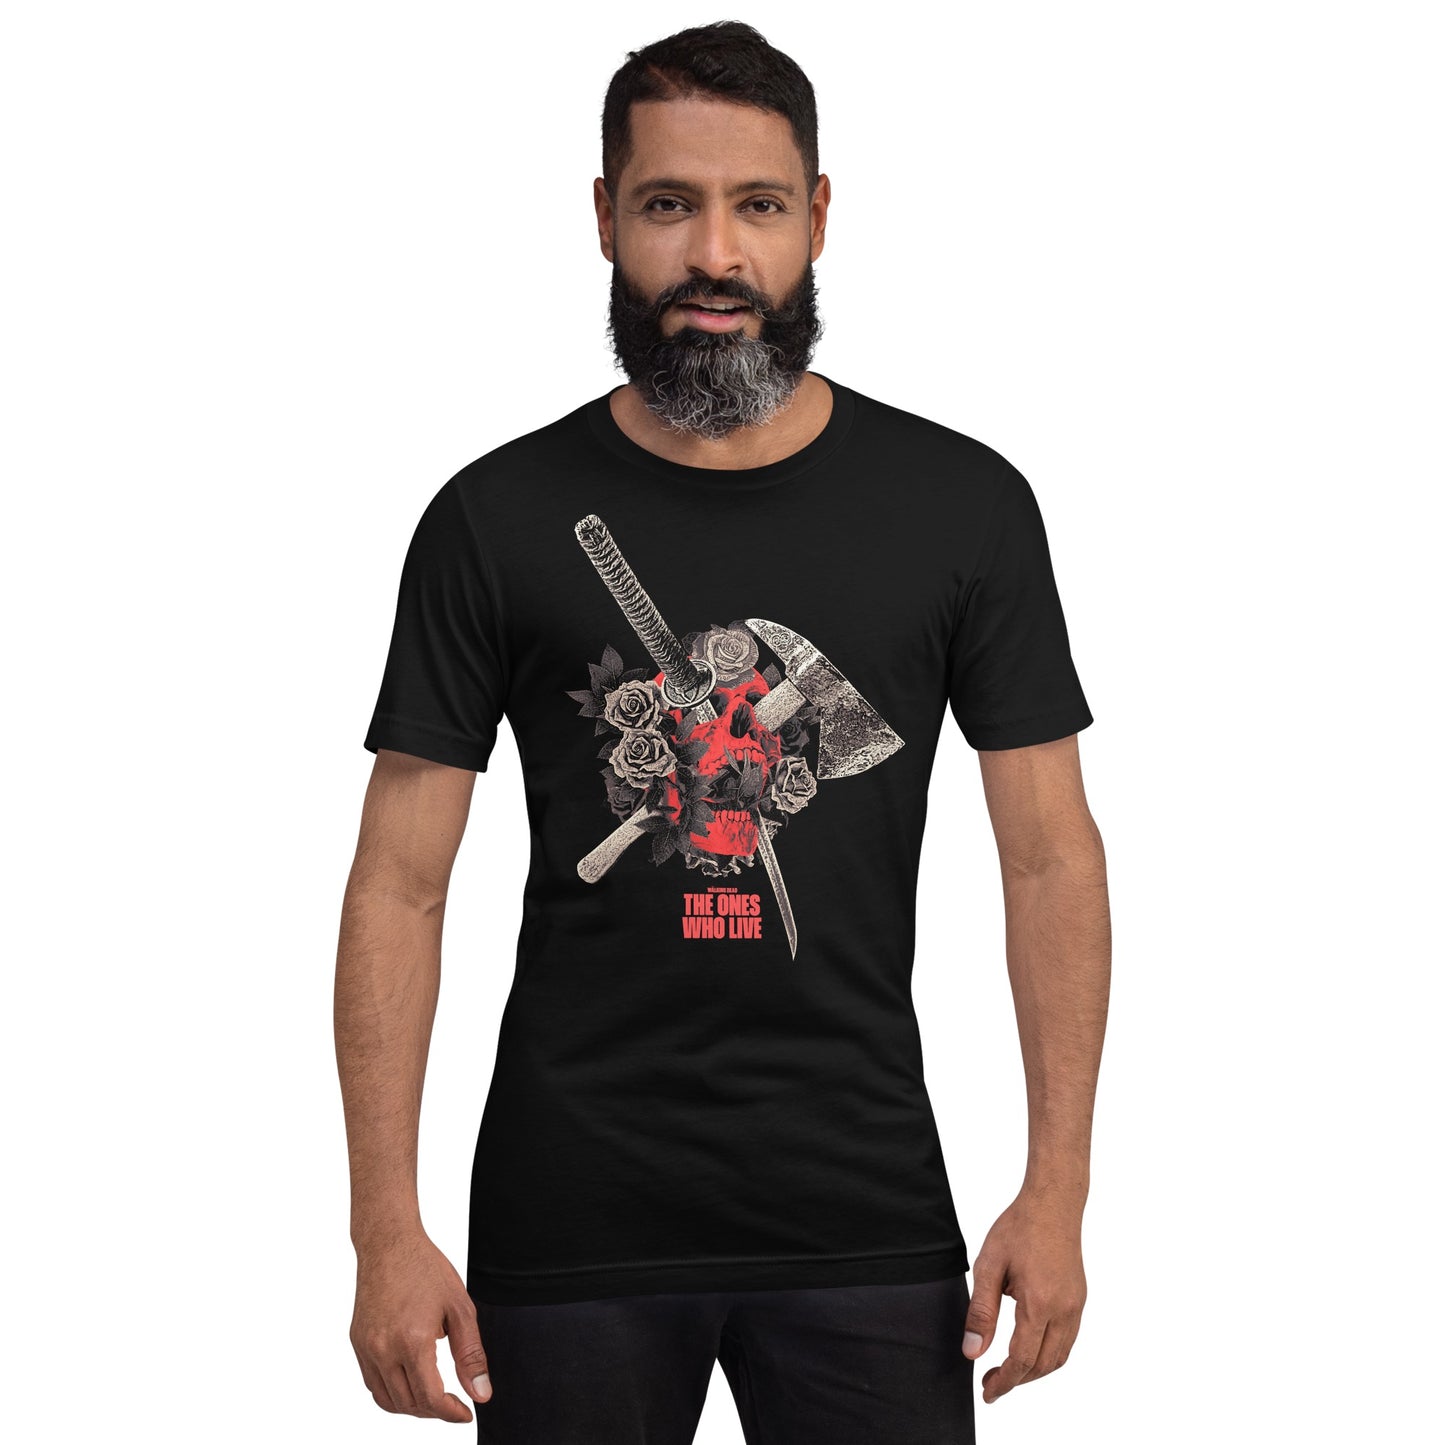 The Walking Dead: The Ones Who Live Floral Skull T-shirt